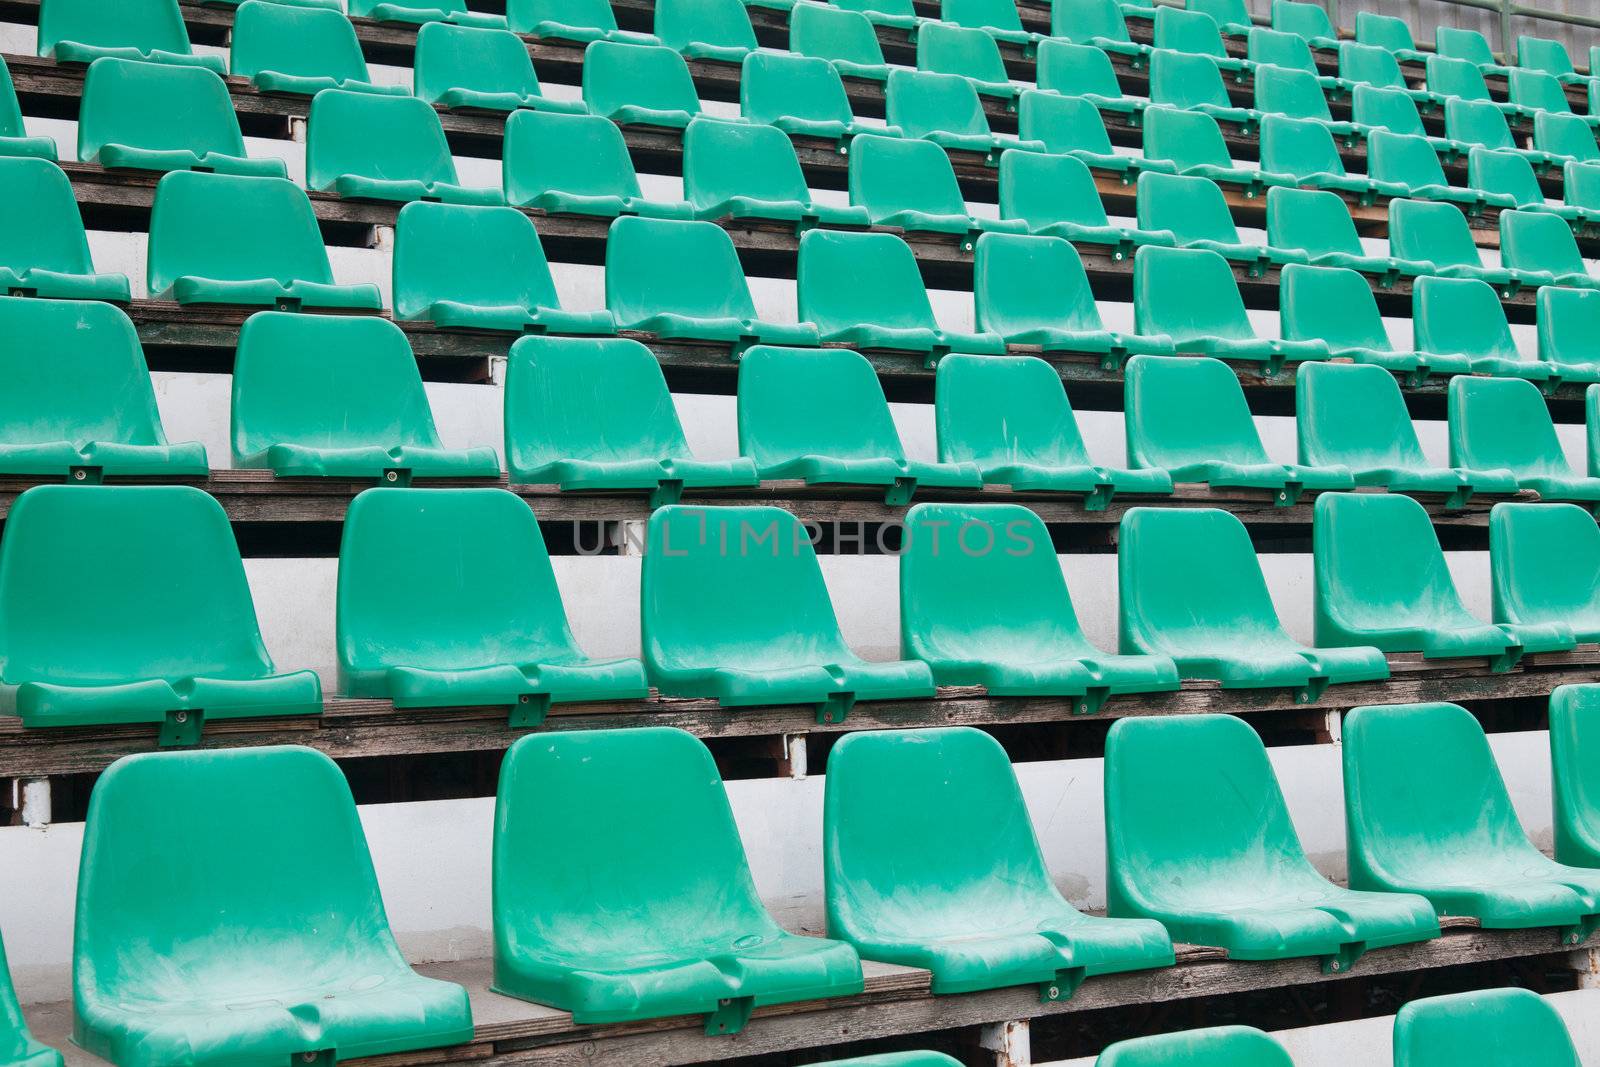 Chairs in stadium by Portokalis